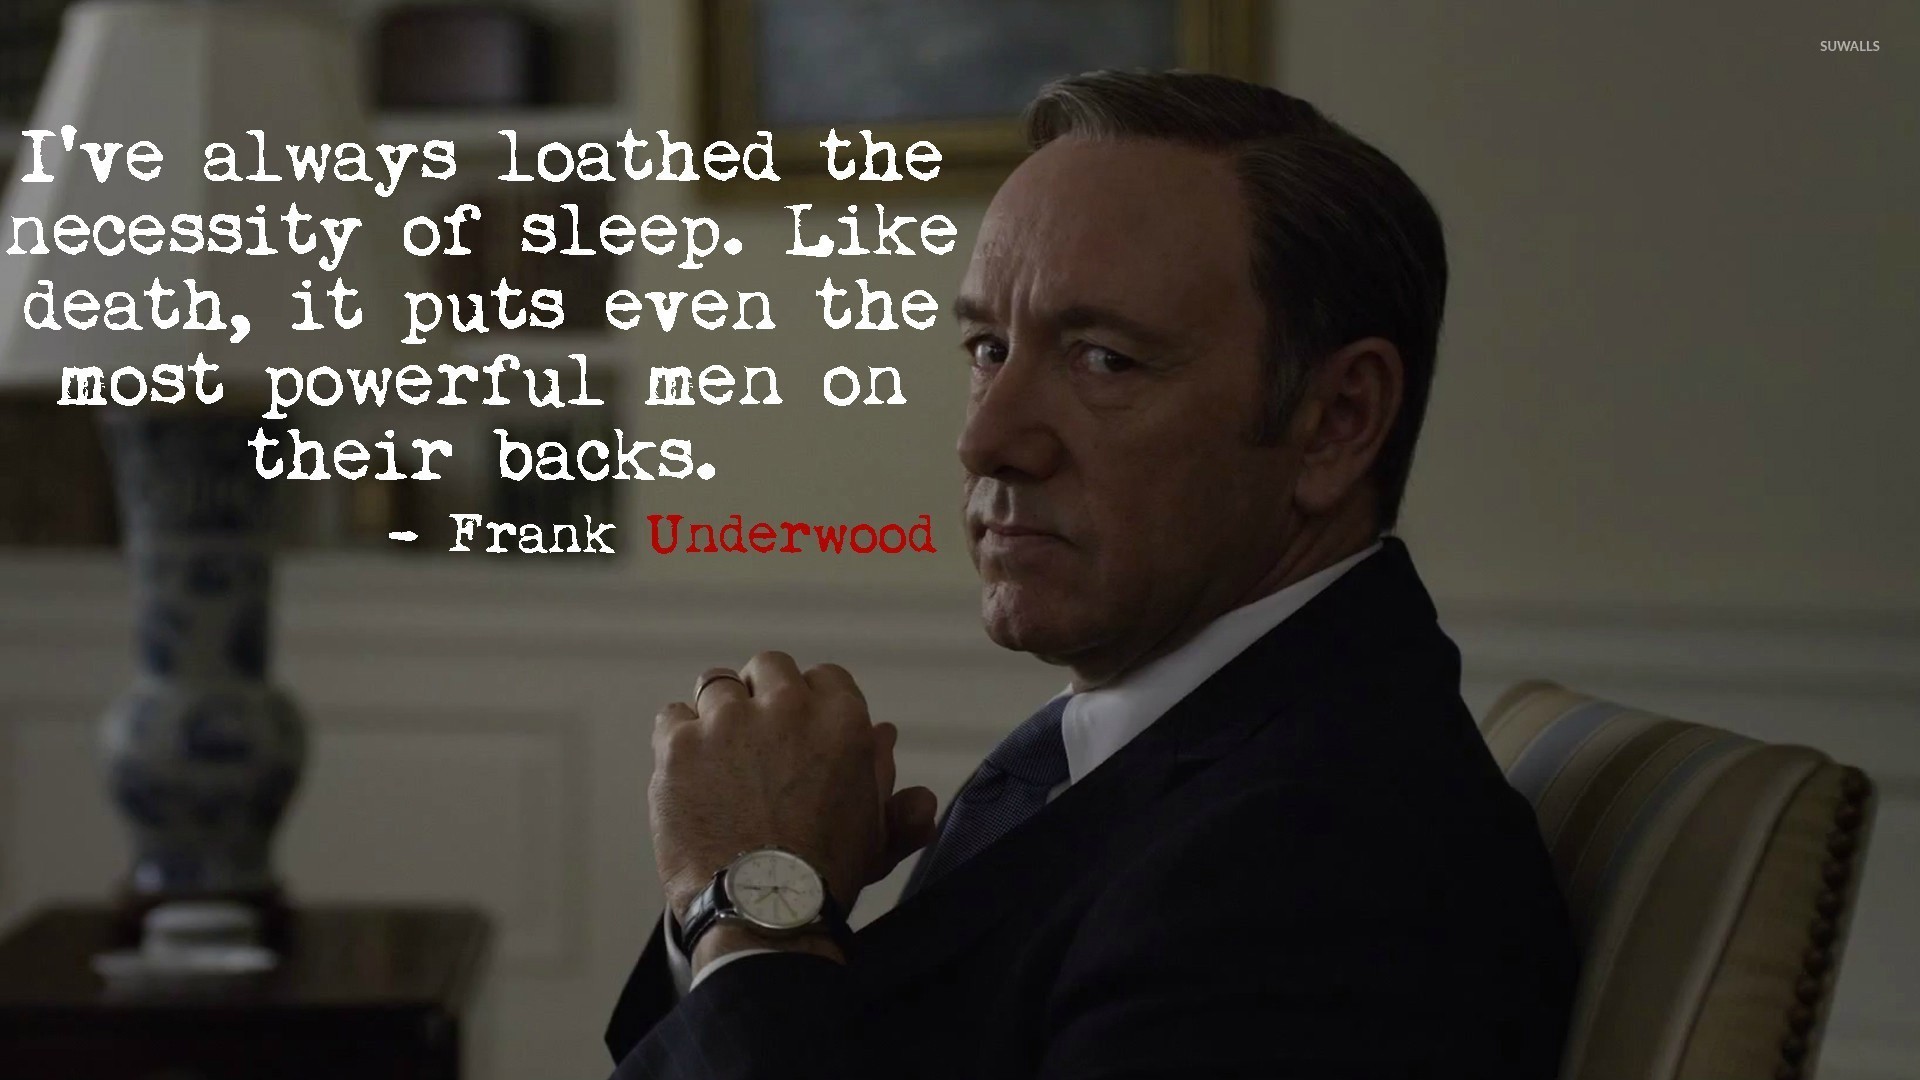 1920x1080 Frank Underwood - House of Cards [3] wallpaper